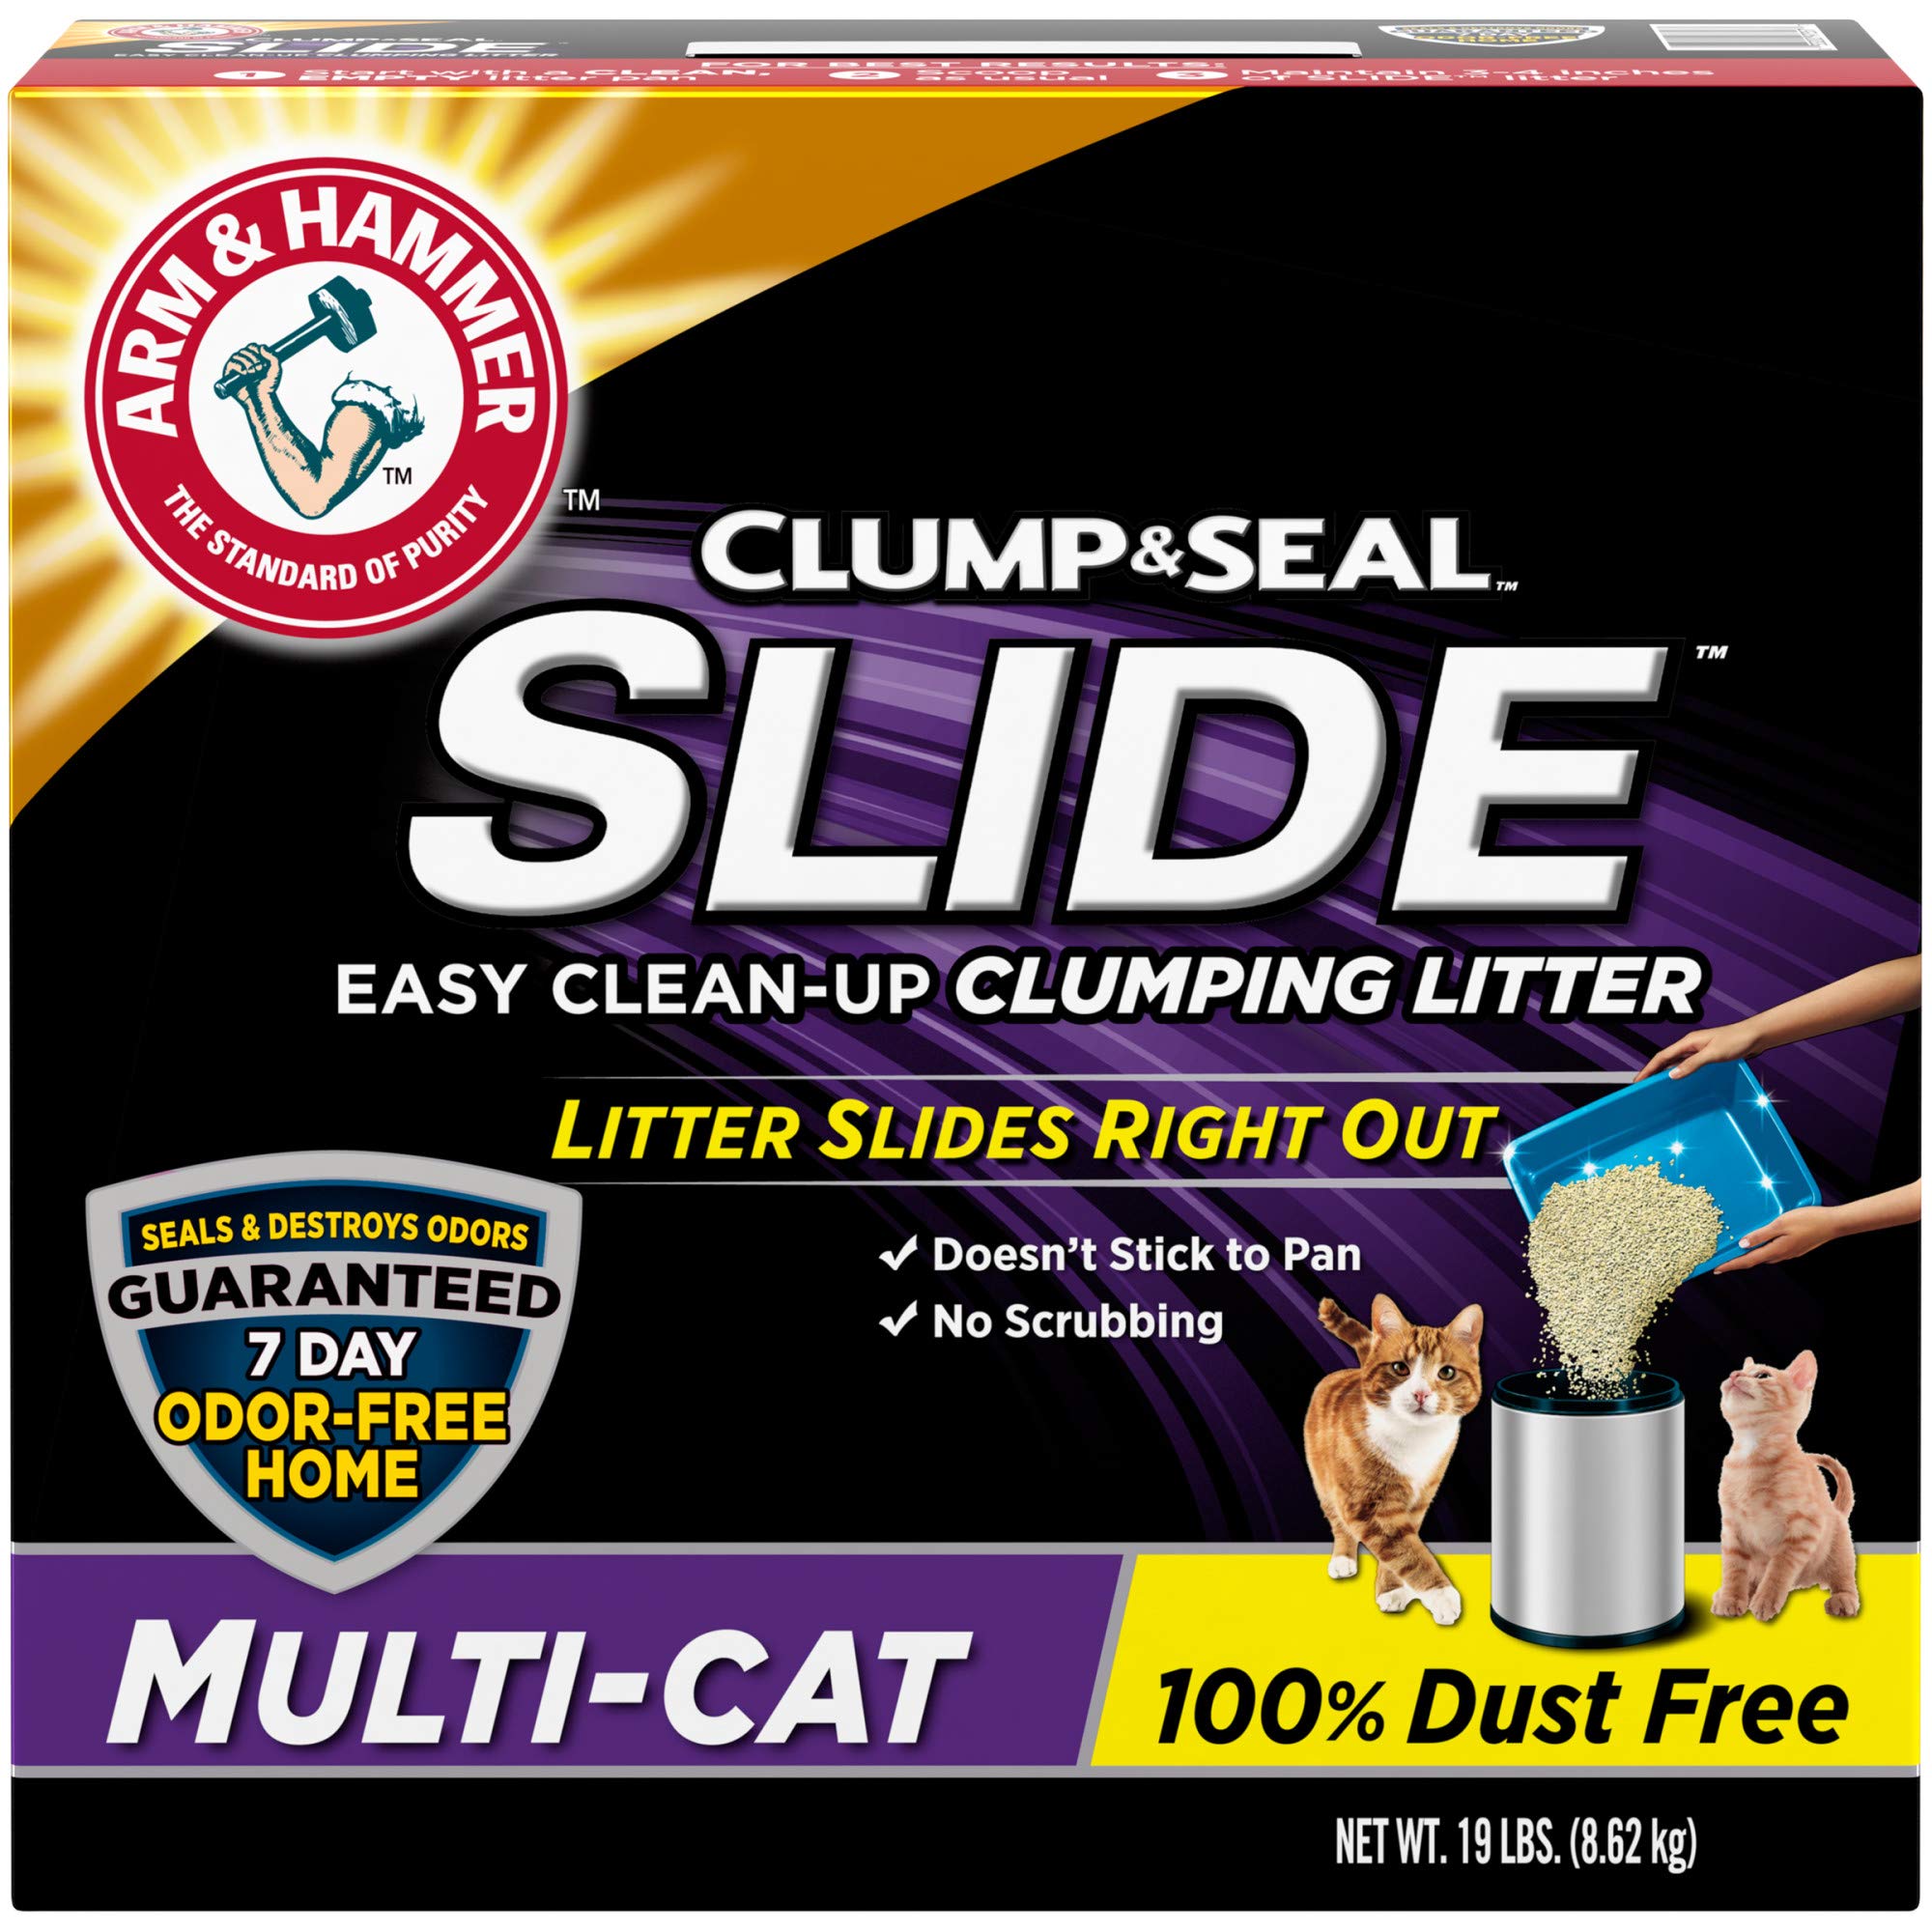 19-Lbs Arm & Hammer Clump & Seal Slide Multi-Cat Clumping Cat Litter $10.71 + Free Shipping w/ Prime or on $35+